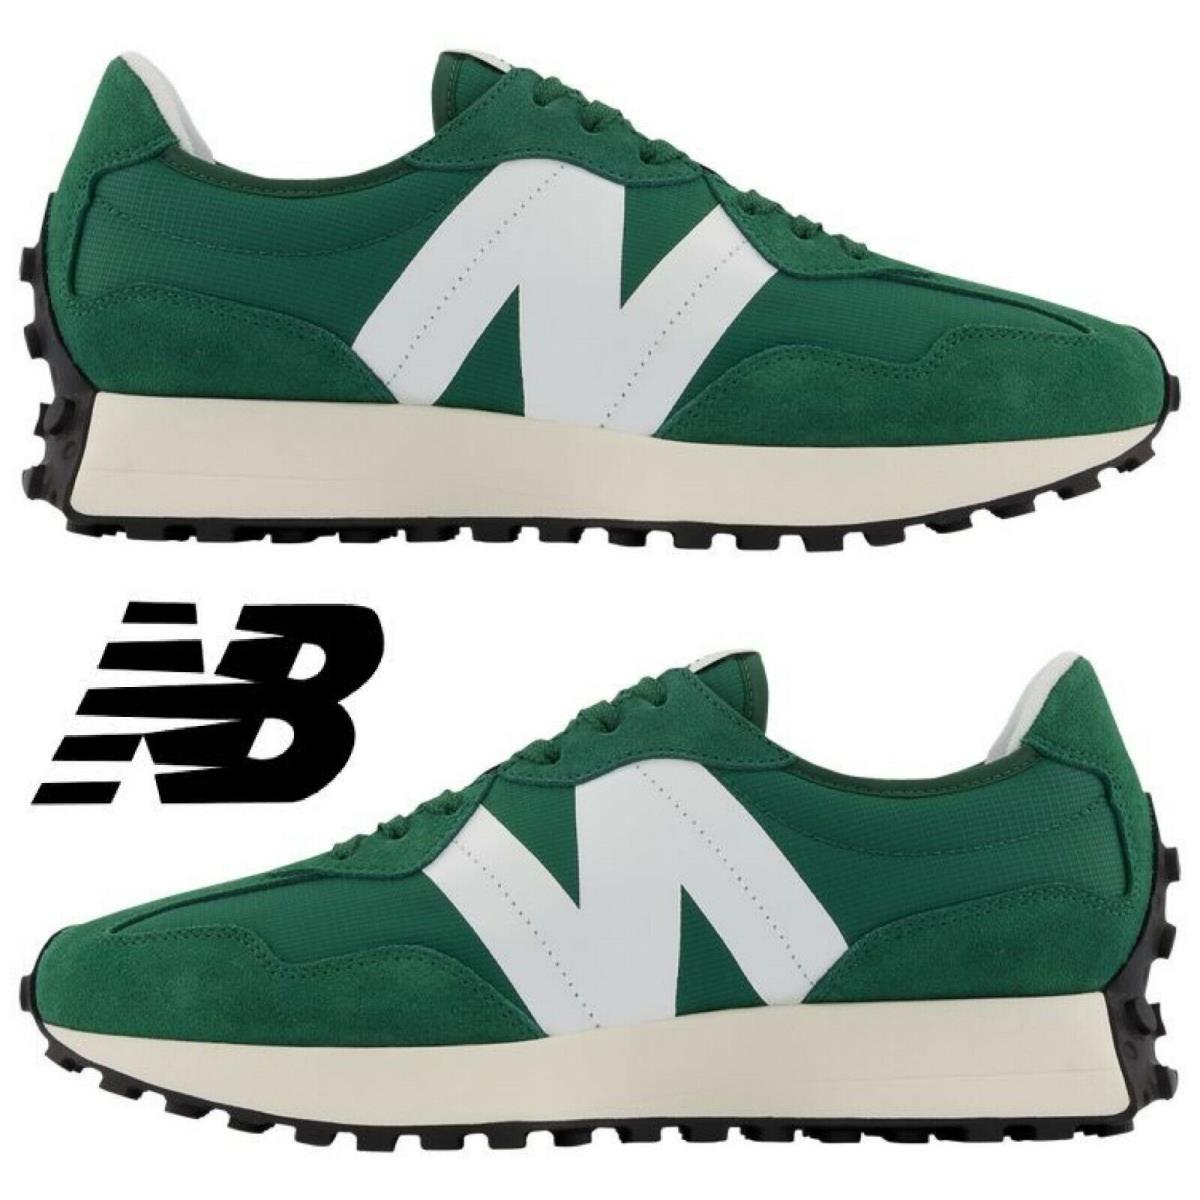 New Balance 327 Men`s Sneakers Casual Shoes Running Premium Comfort Sport - Green , Forest Green/White Manufacturer